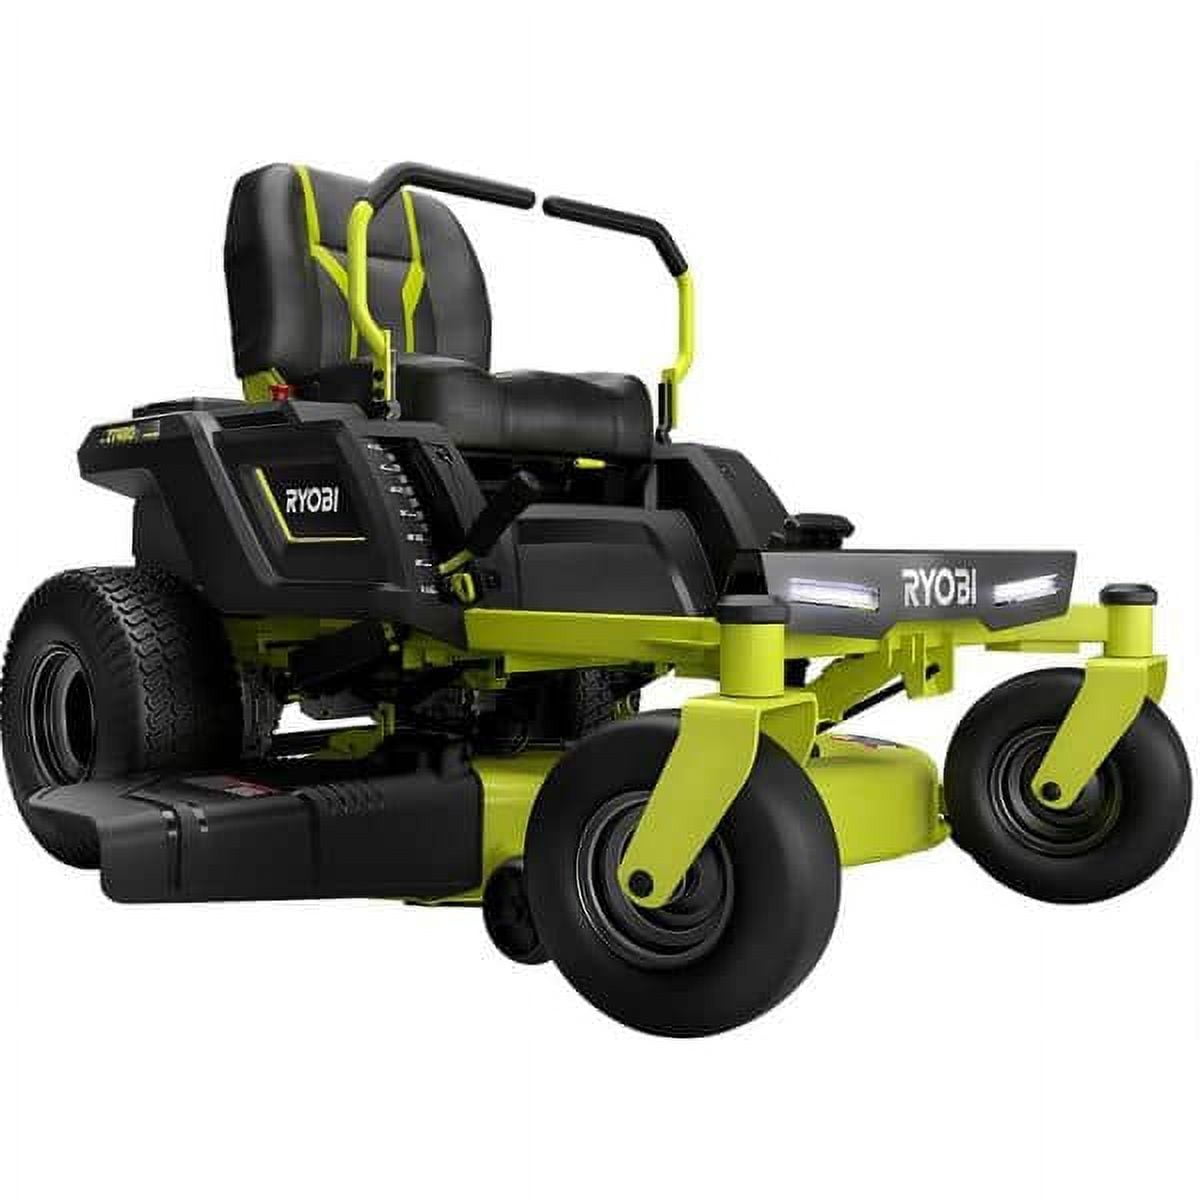 RYOBI Bagger with Boost for RYOBI 80V HP 42 in. Zero Turn Riding Lawn Mower  ACRM026 - The Home Depot